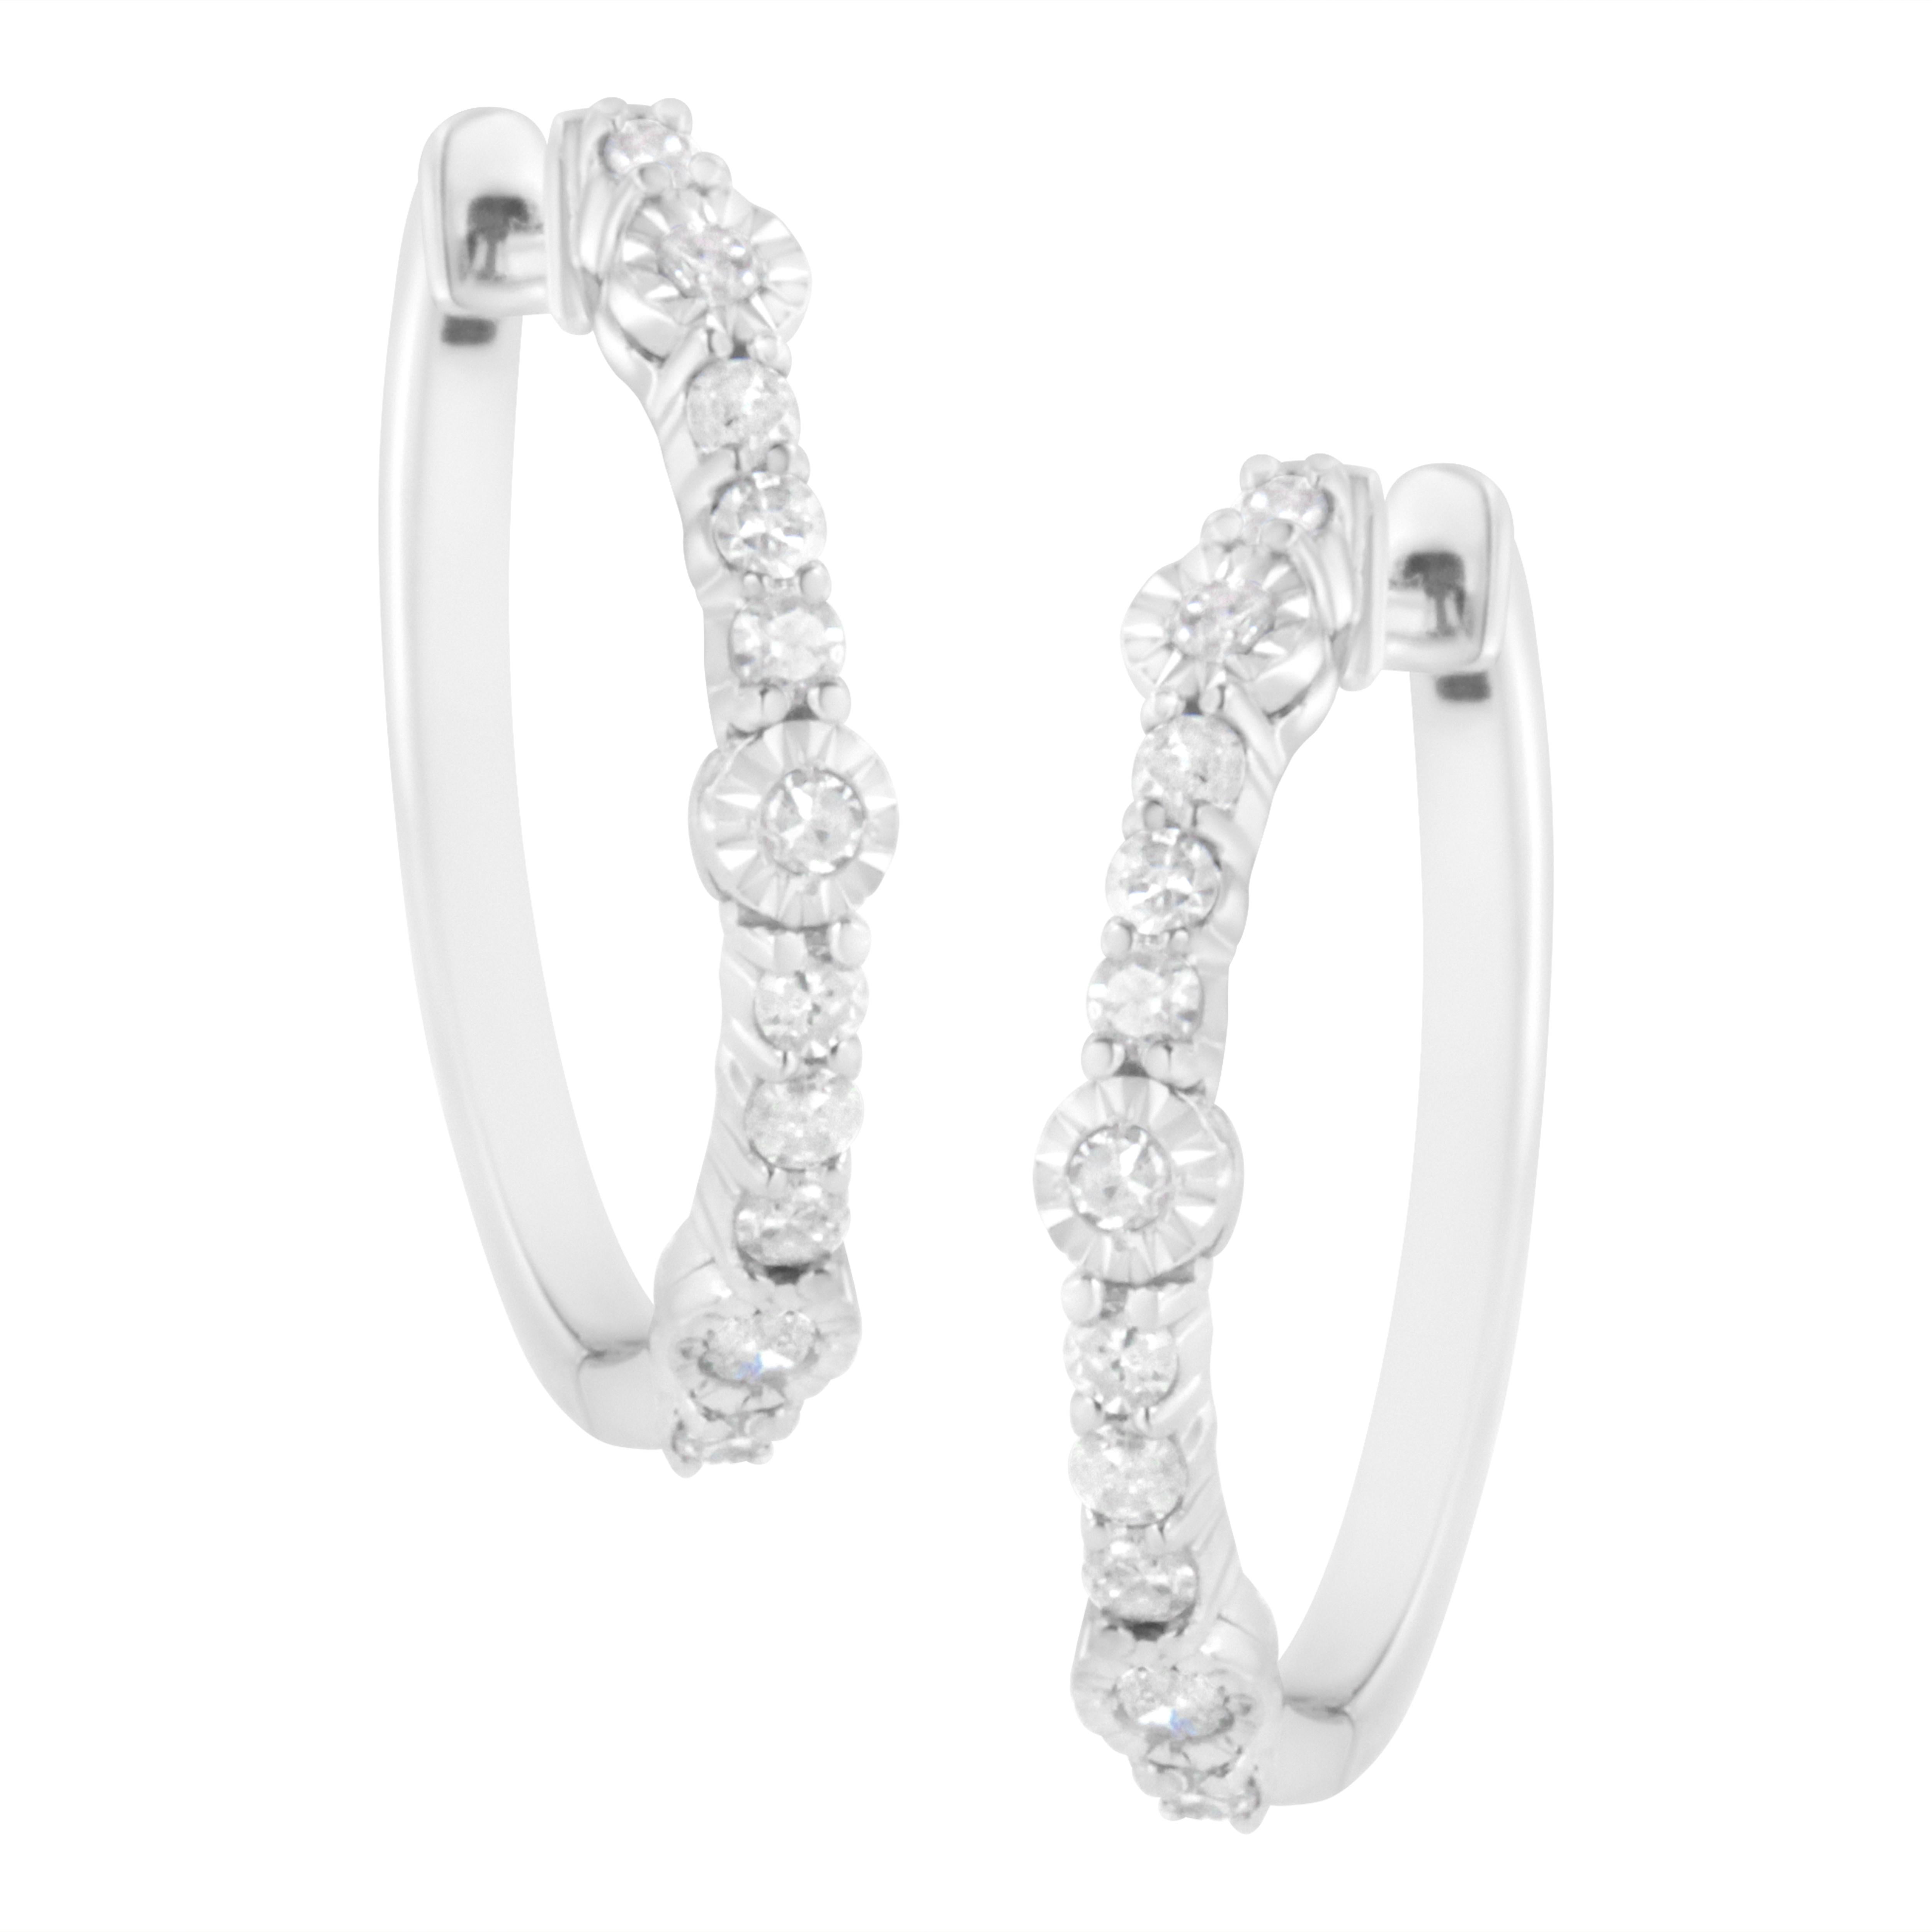 .925 Sterling Silver 1/4 Carat Prong and Miracle Set Diamond Hoop Earring